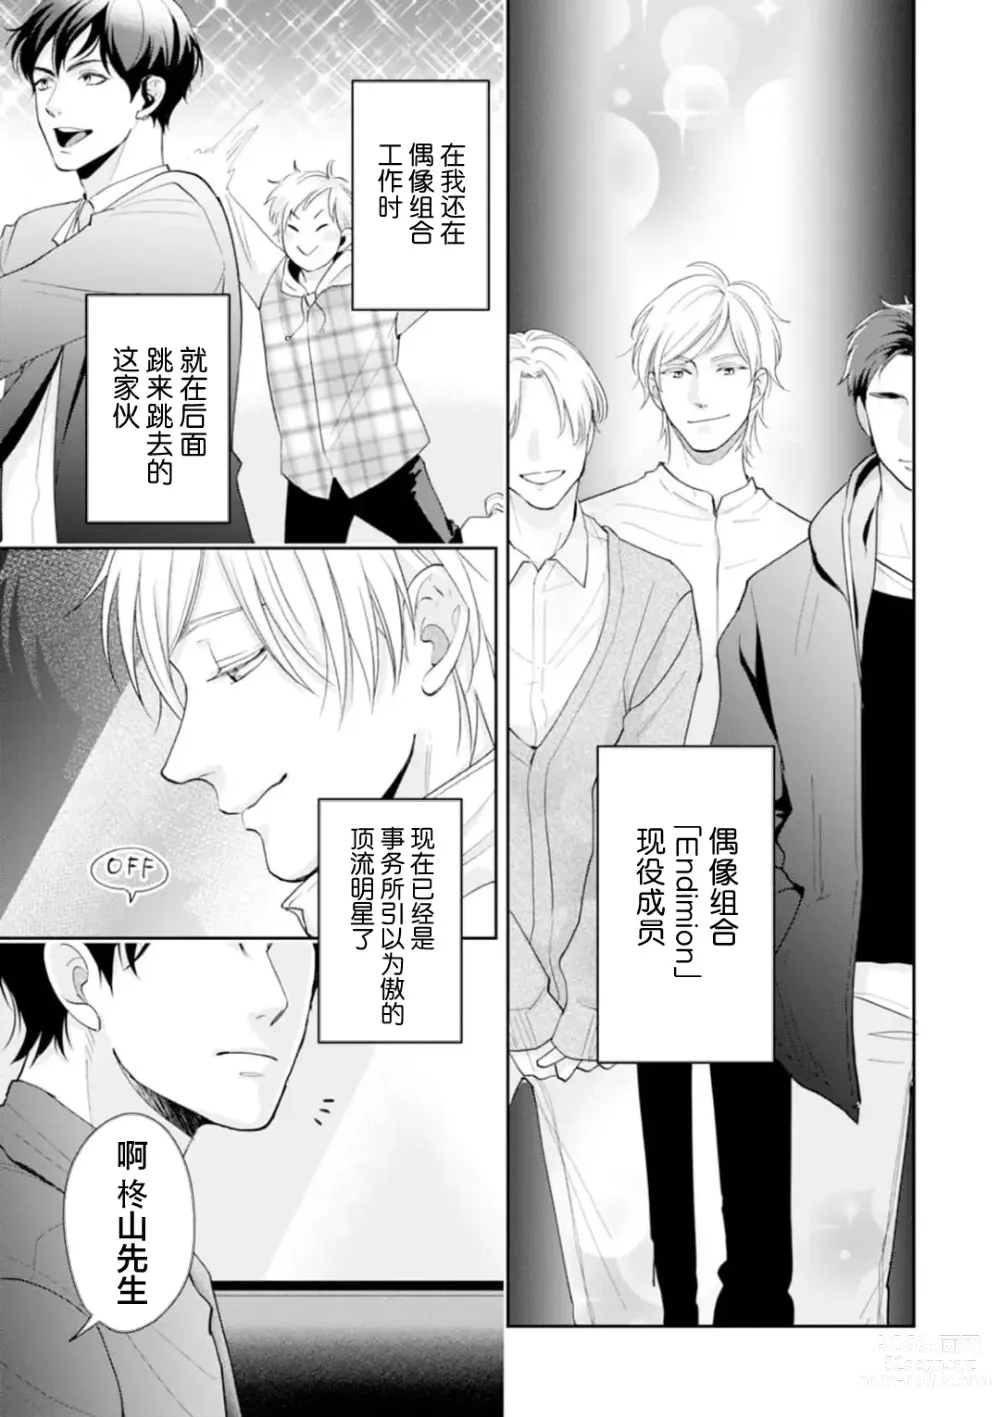 Page 21 of manga Toshiue no hitoーsecond bloomー｜年上之人—second bloom—Chinese]